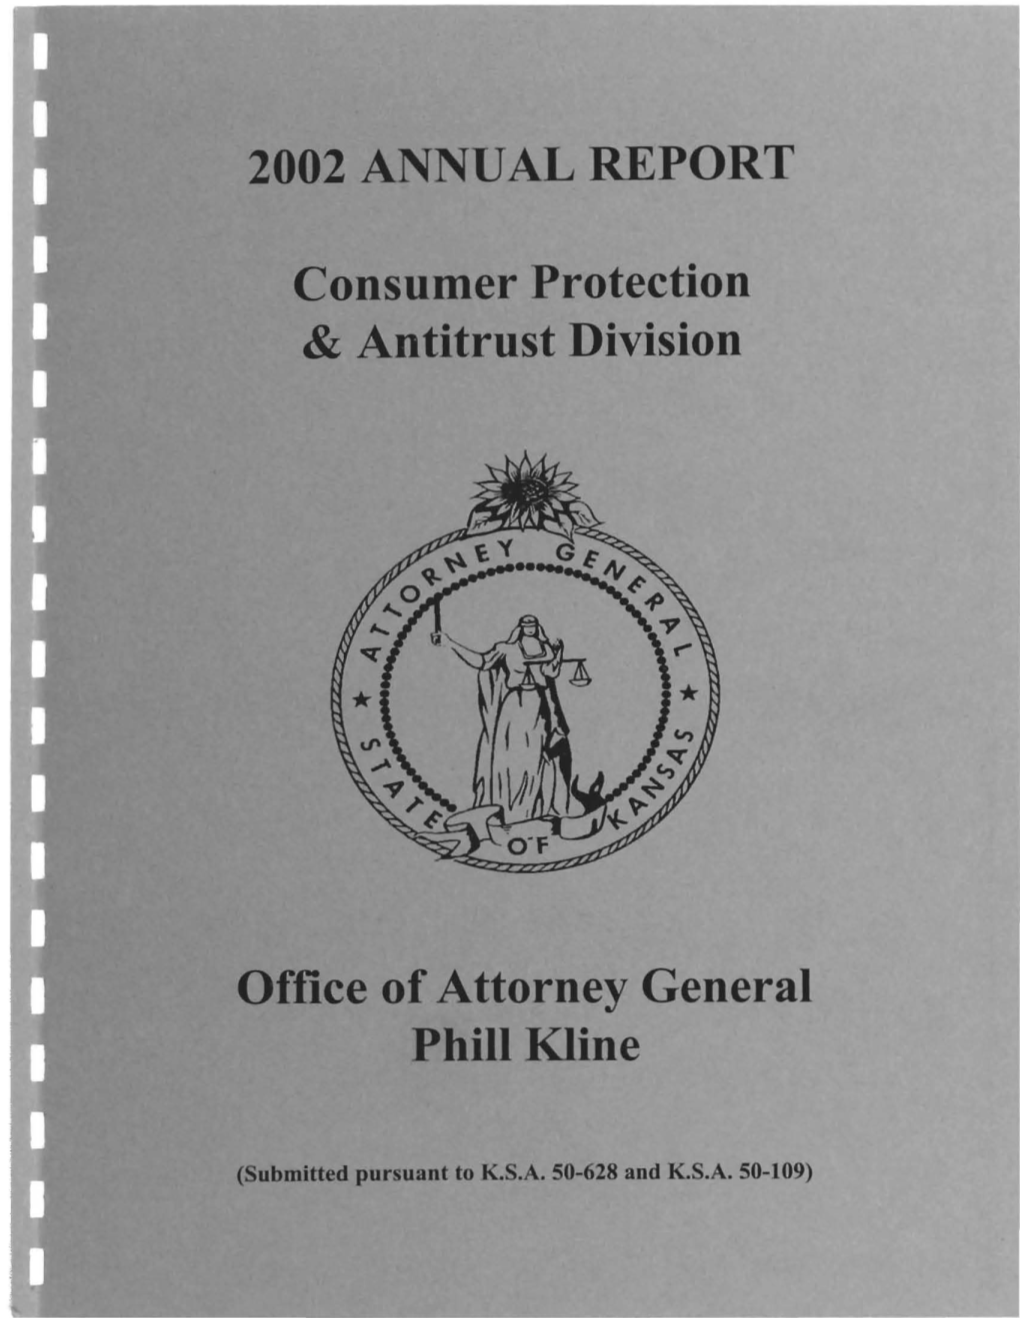 2002 Consumer Protection Annual Report